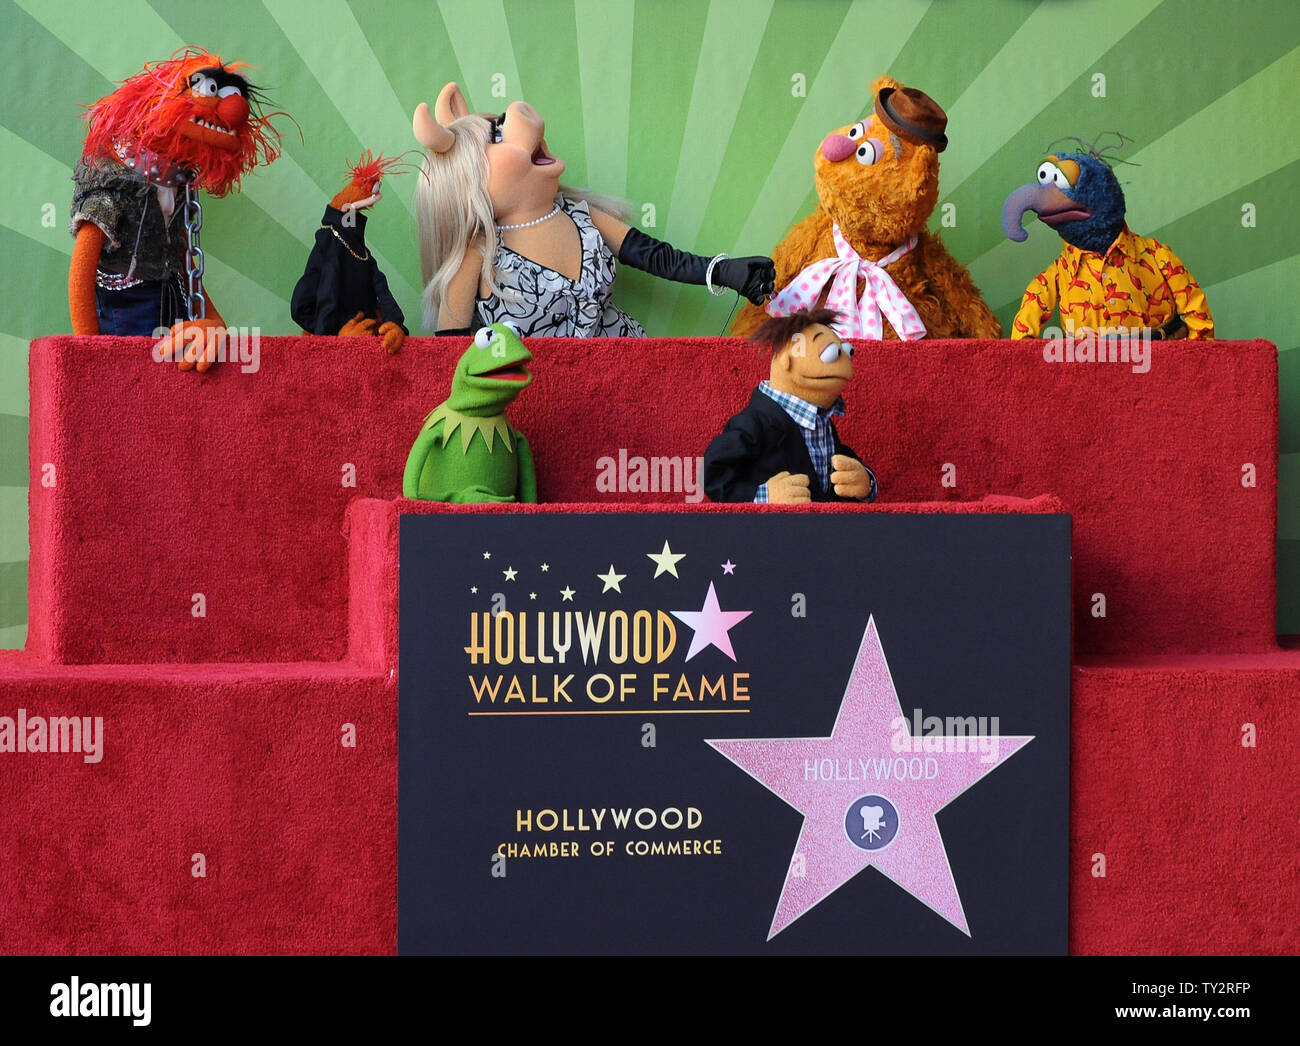 Muppets Animal, Pepe, Miss Piggy, Fozzie, Gonzo, (L-R, rear) and Kermit and Walter (L-R), foreground) attend the Inimitable Muppets unveiling ceremony honoring The Muppets  with the 2,466th star on the Hollywood Walk of Fame in Los Angeles on March 20, 2012. UPI/Jim Ruymen Stock Photo